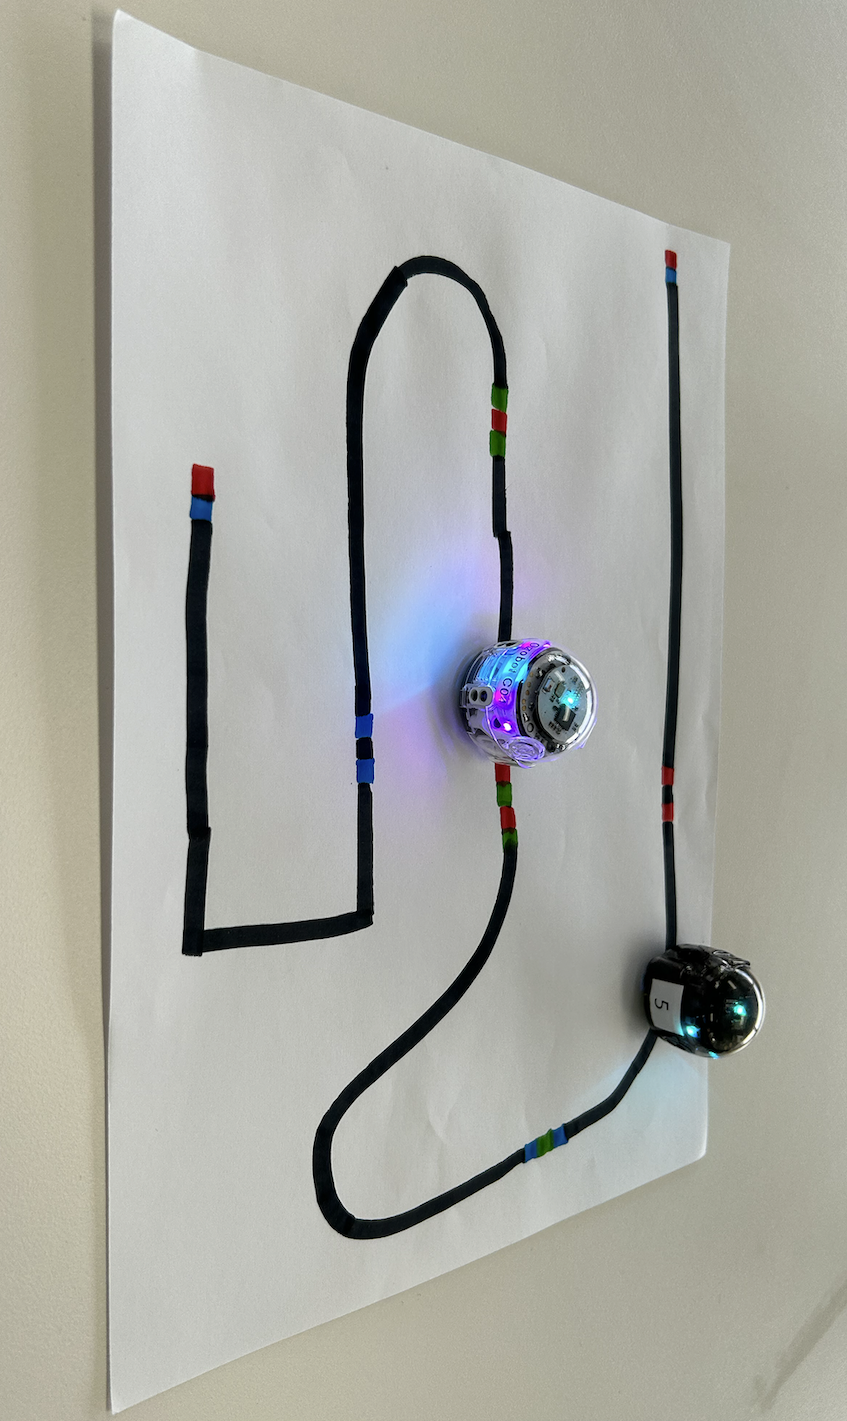 What are Ozobots? 